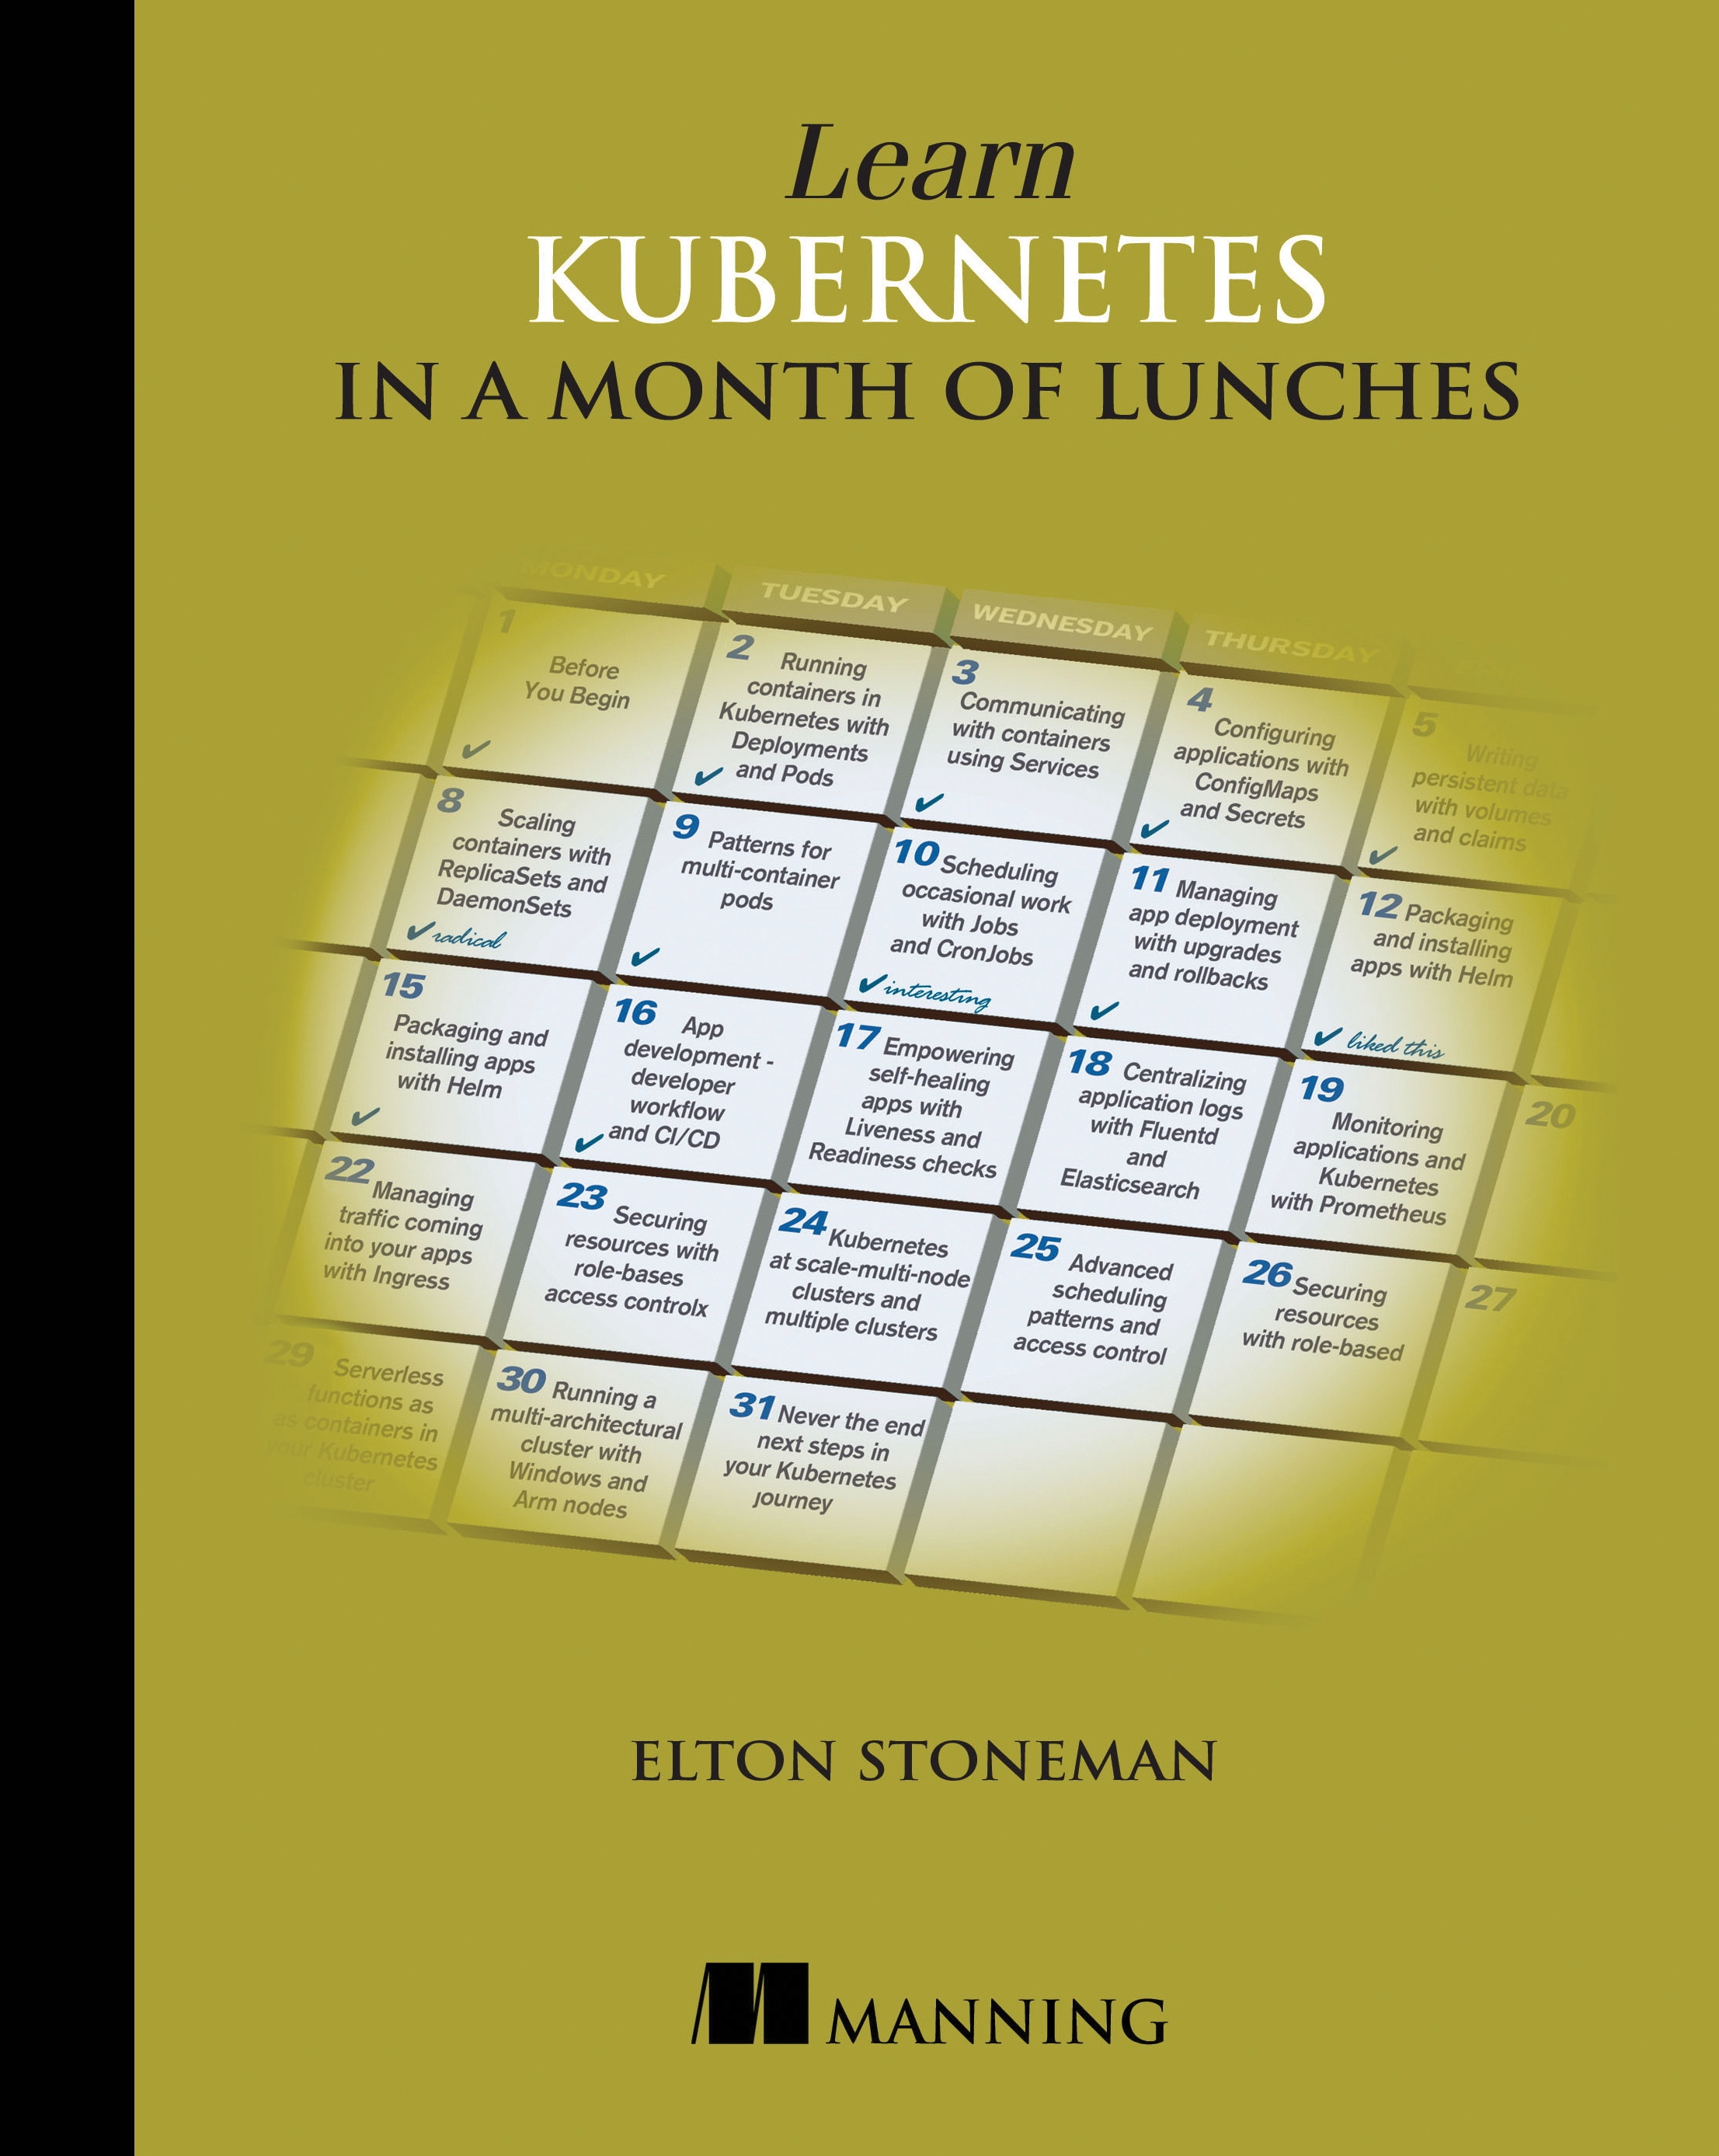 Elton Stoneman: Learn Kubernetes in a Month of Lunches (2021, Manning Publications Co. LLC)